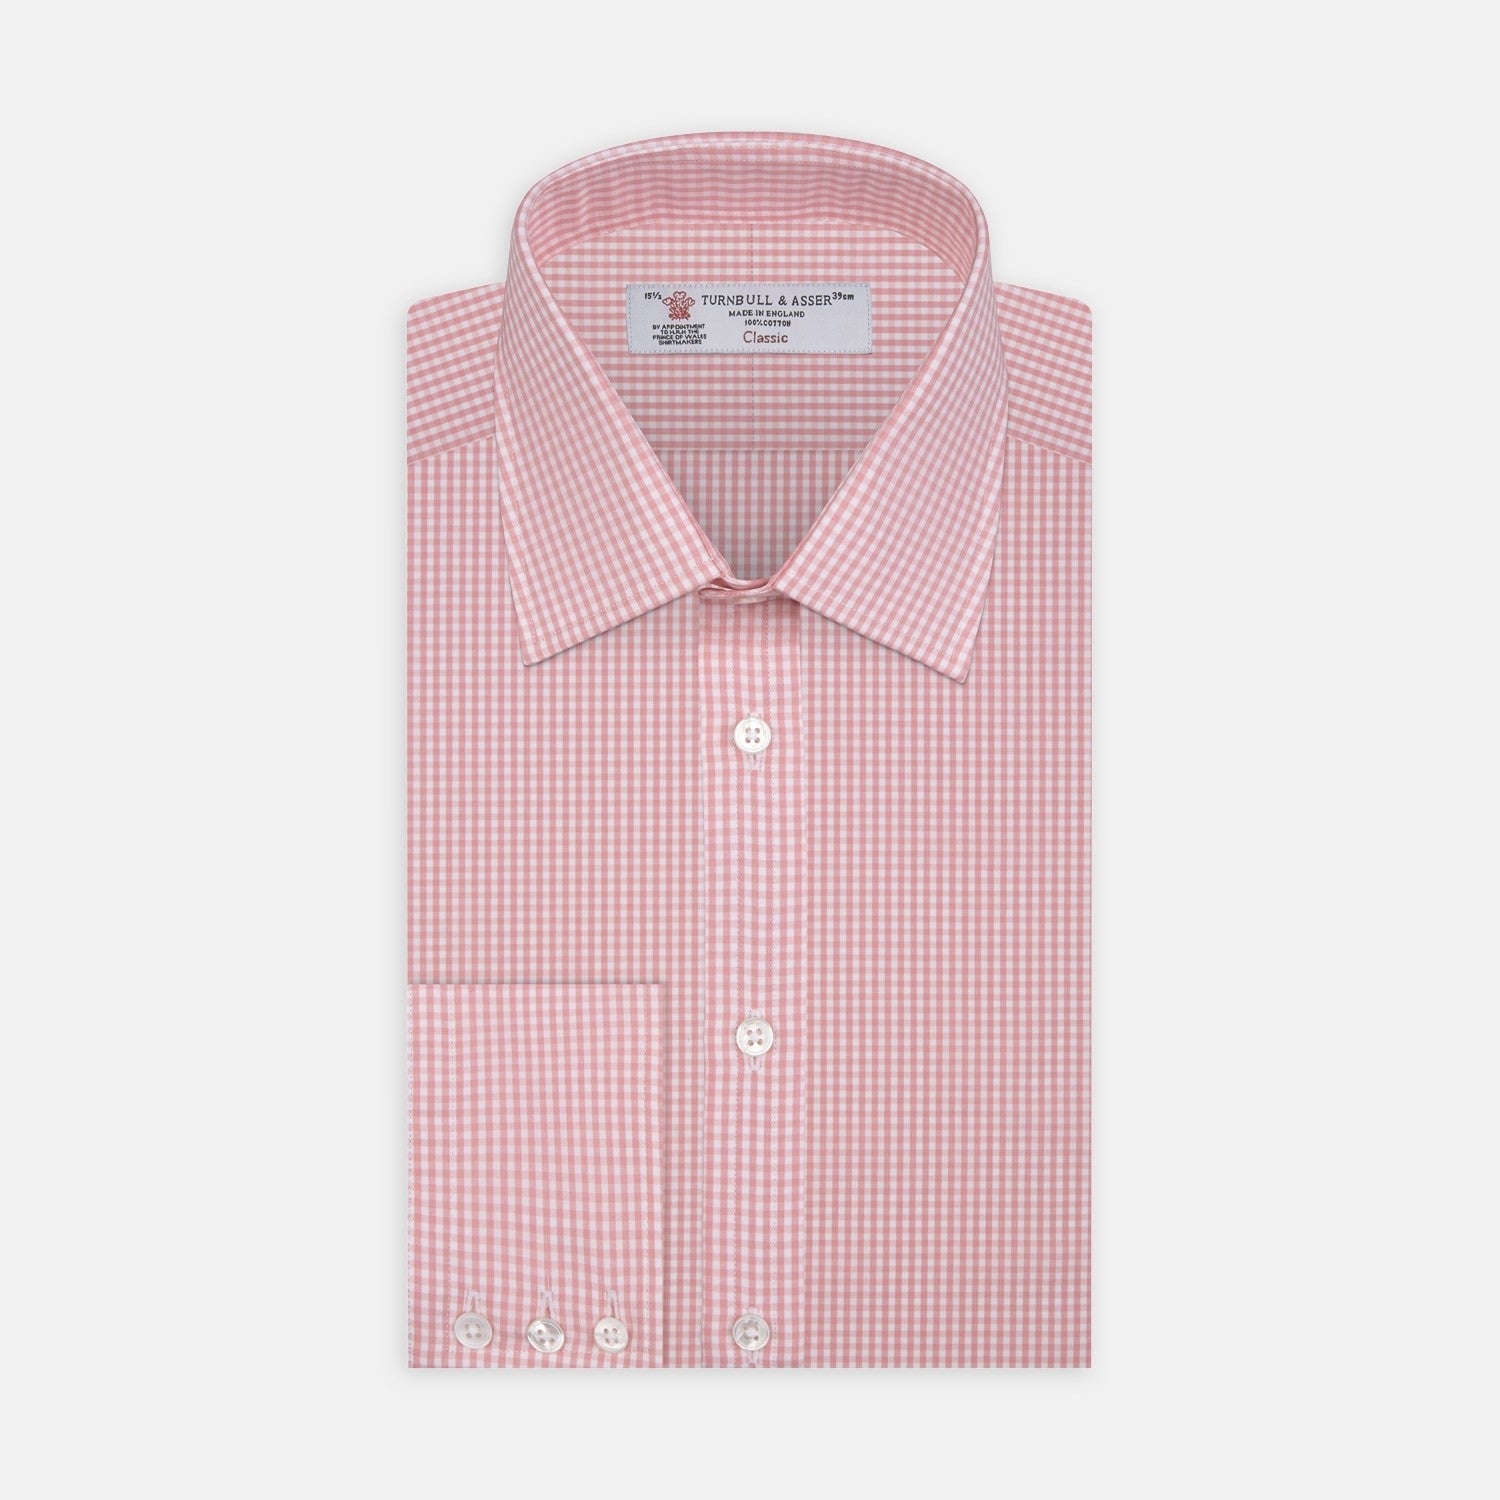 Light Pink Gingham Check Cotton Fabric